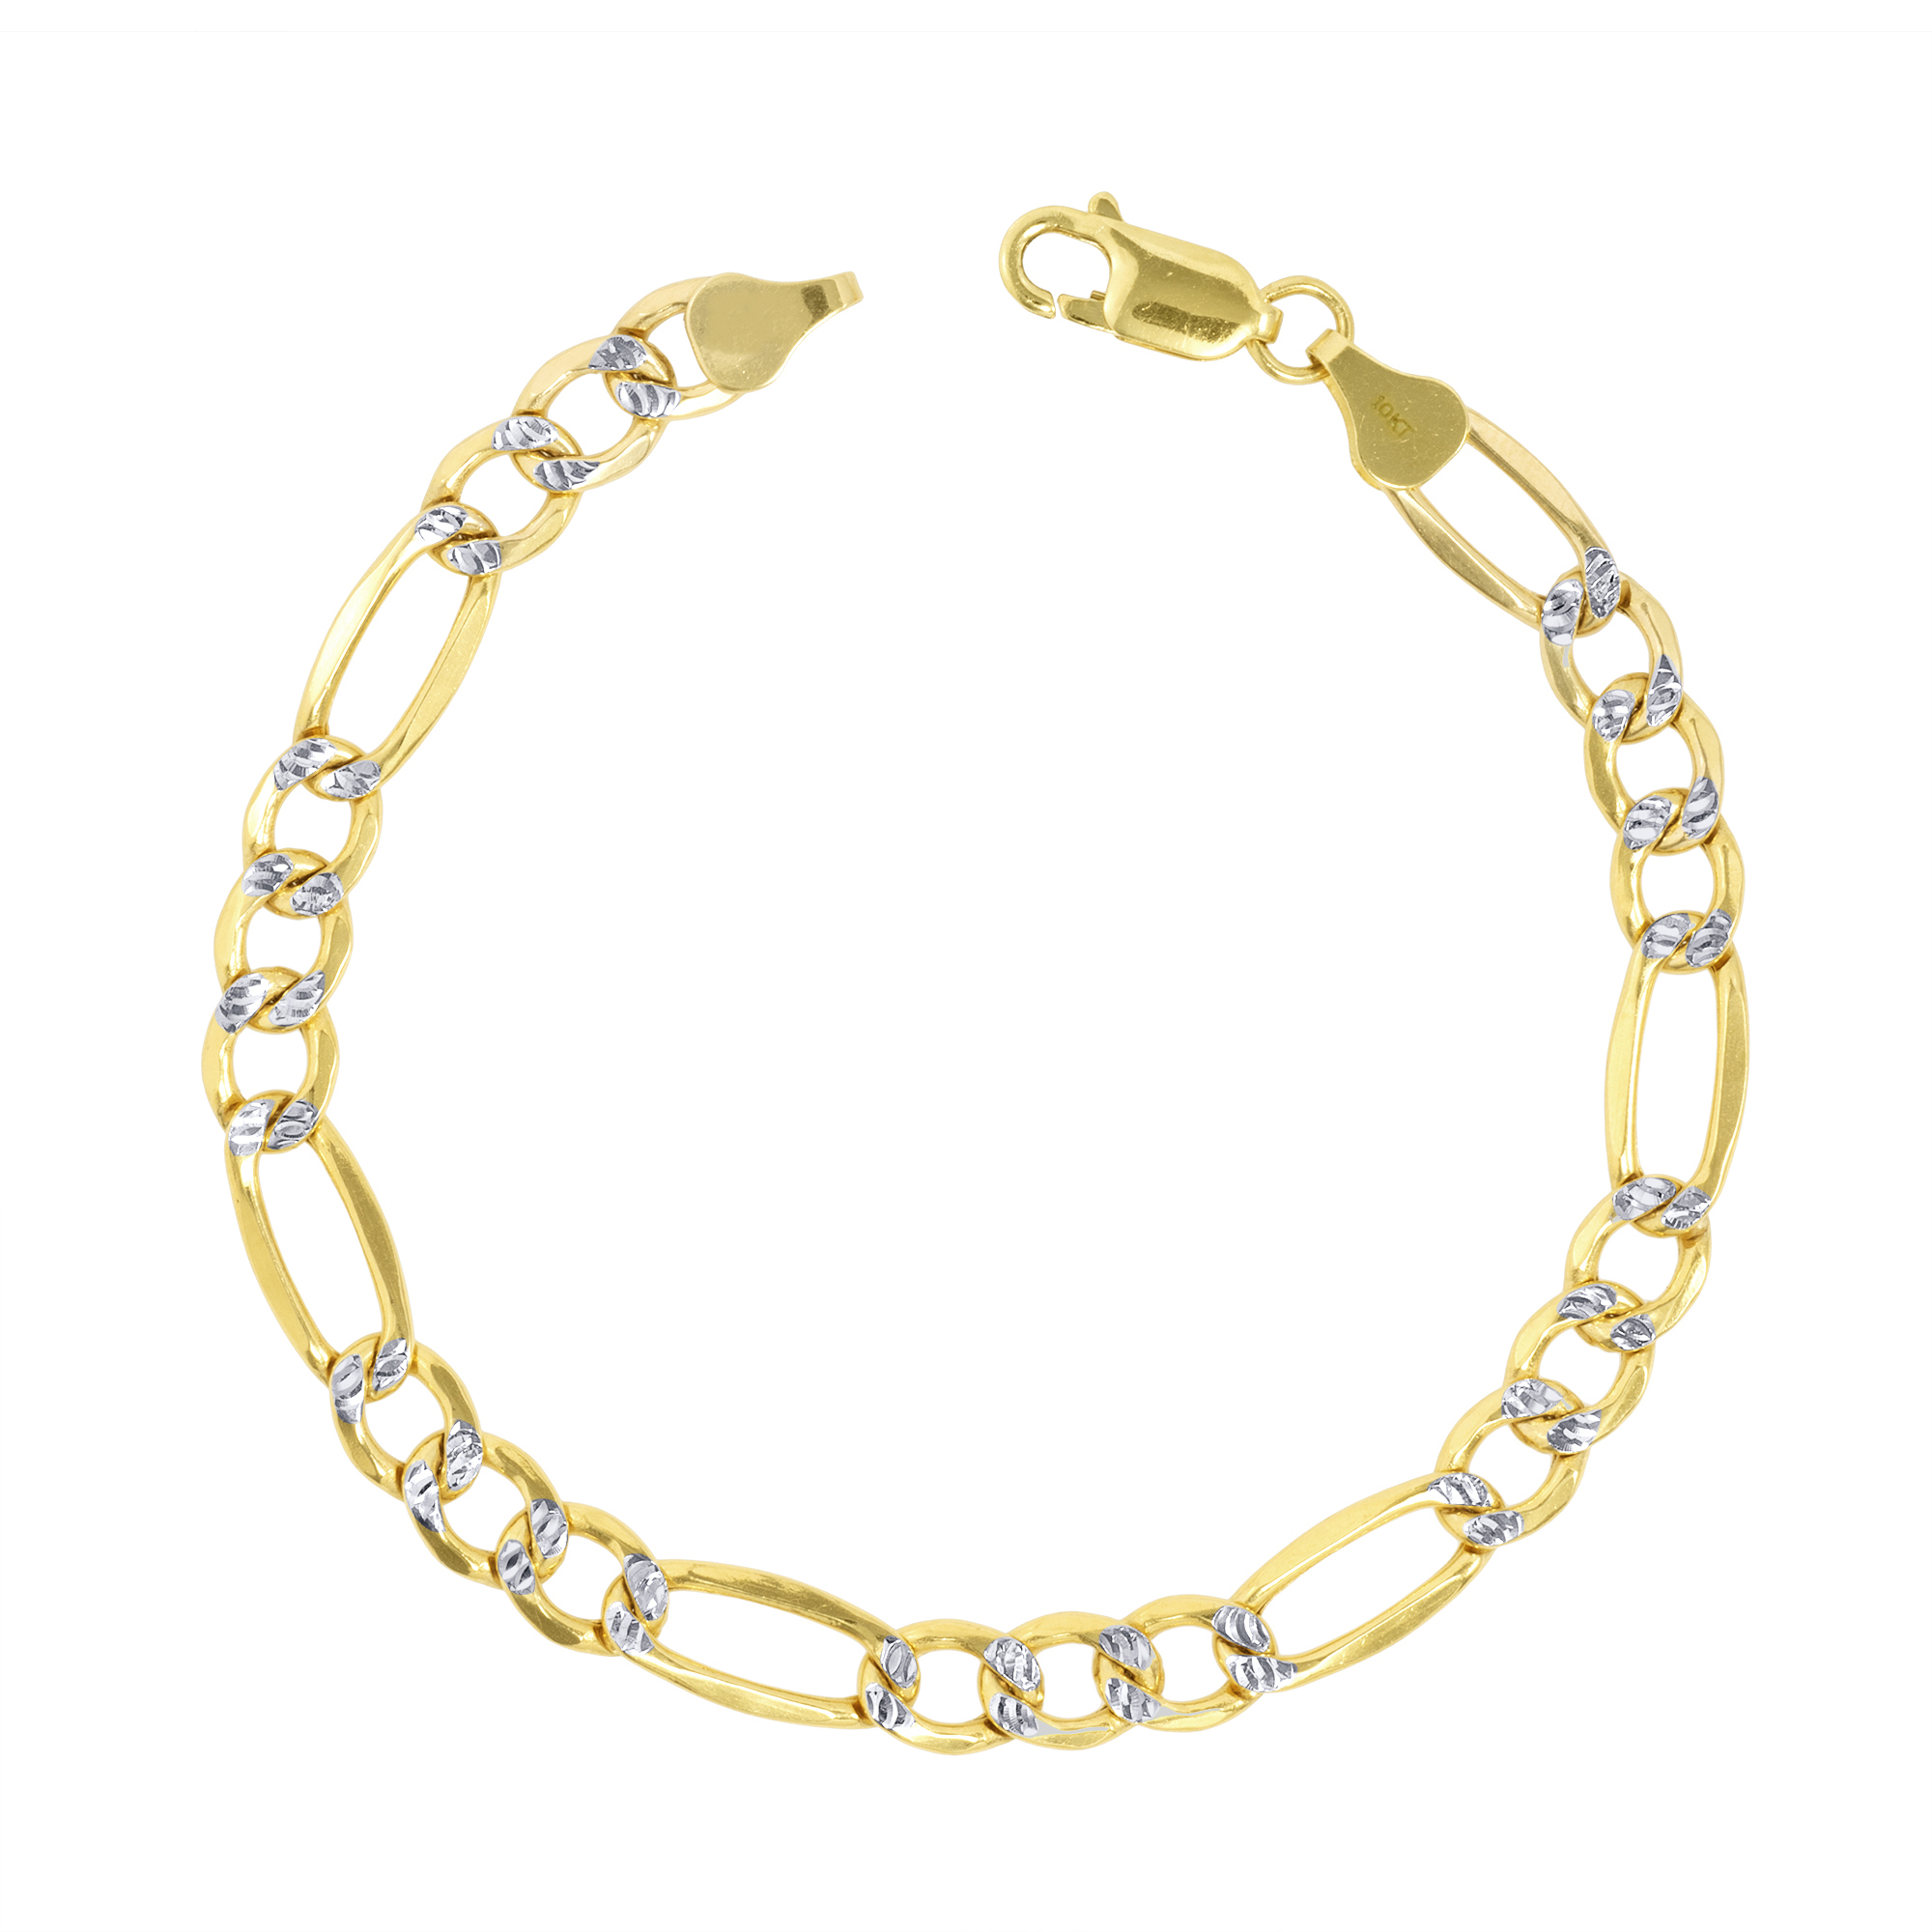 IcedTime 10K Yellow Gold 1.75mm Diamond Cut Mariner Link Chain Bracelet with Lobster Clasp 